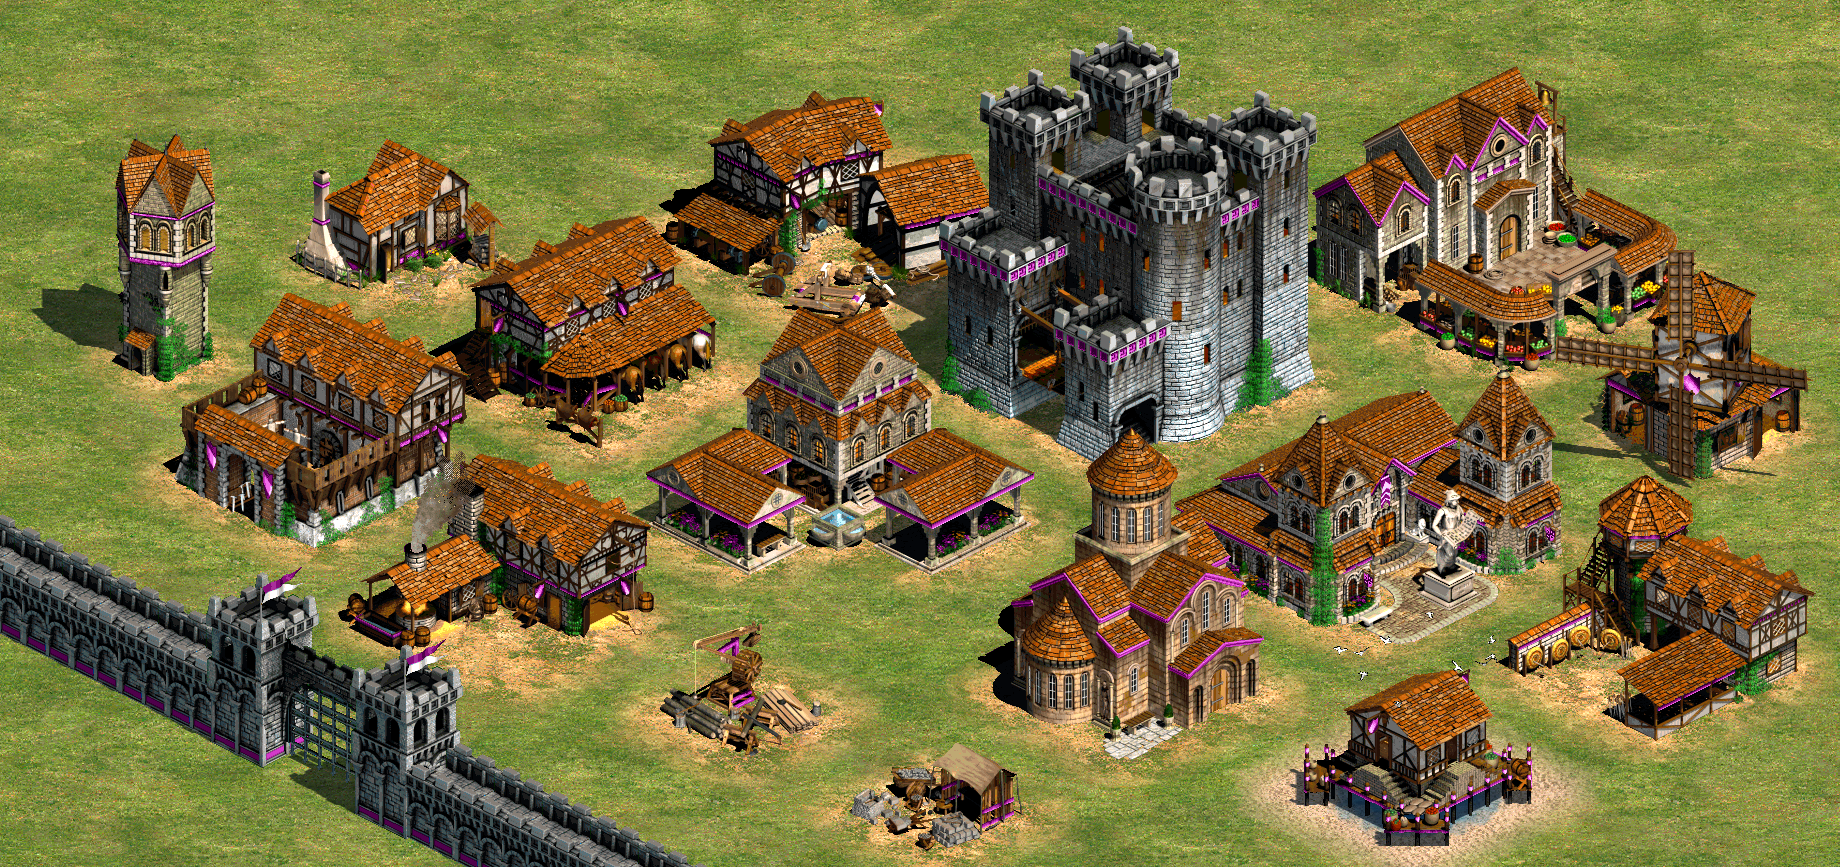 age of empires 2 buildings